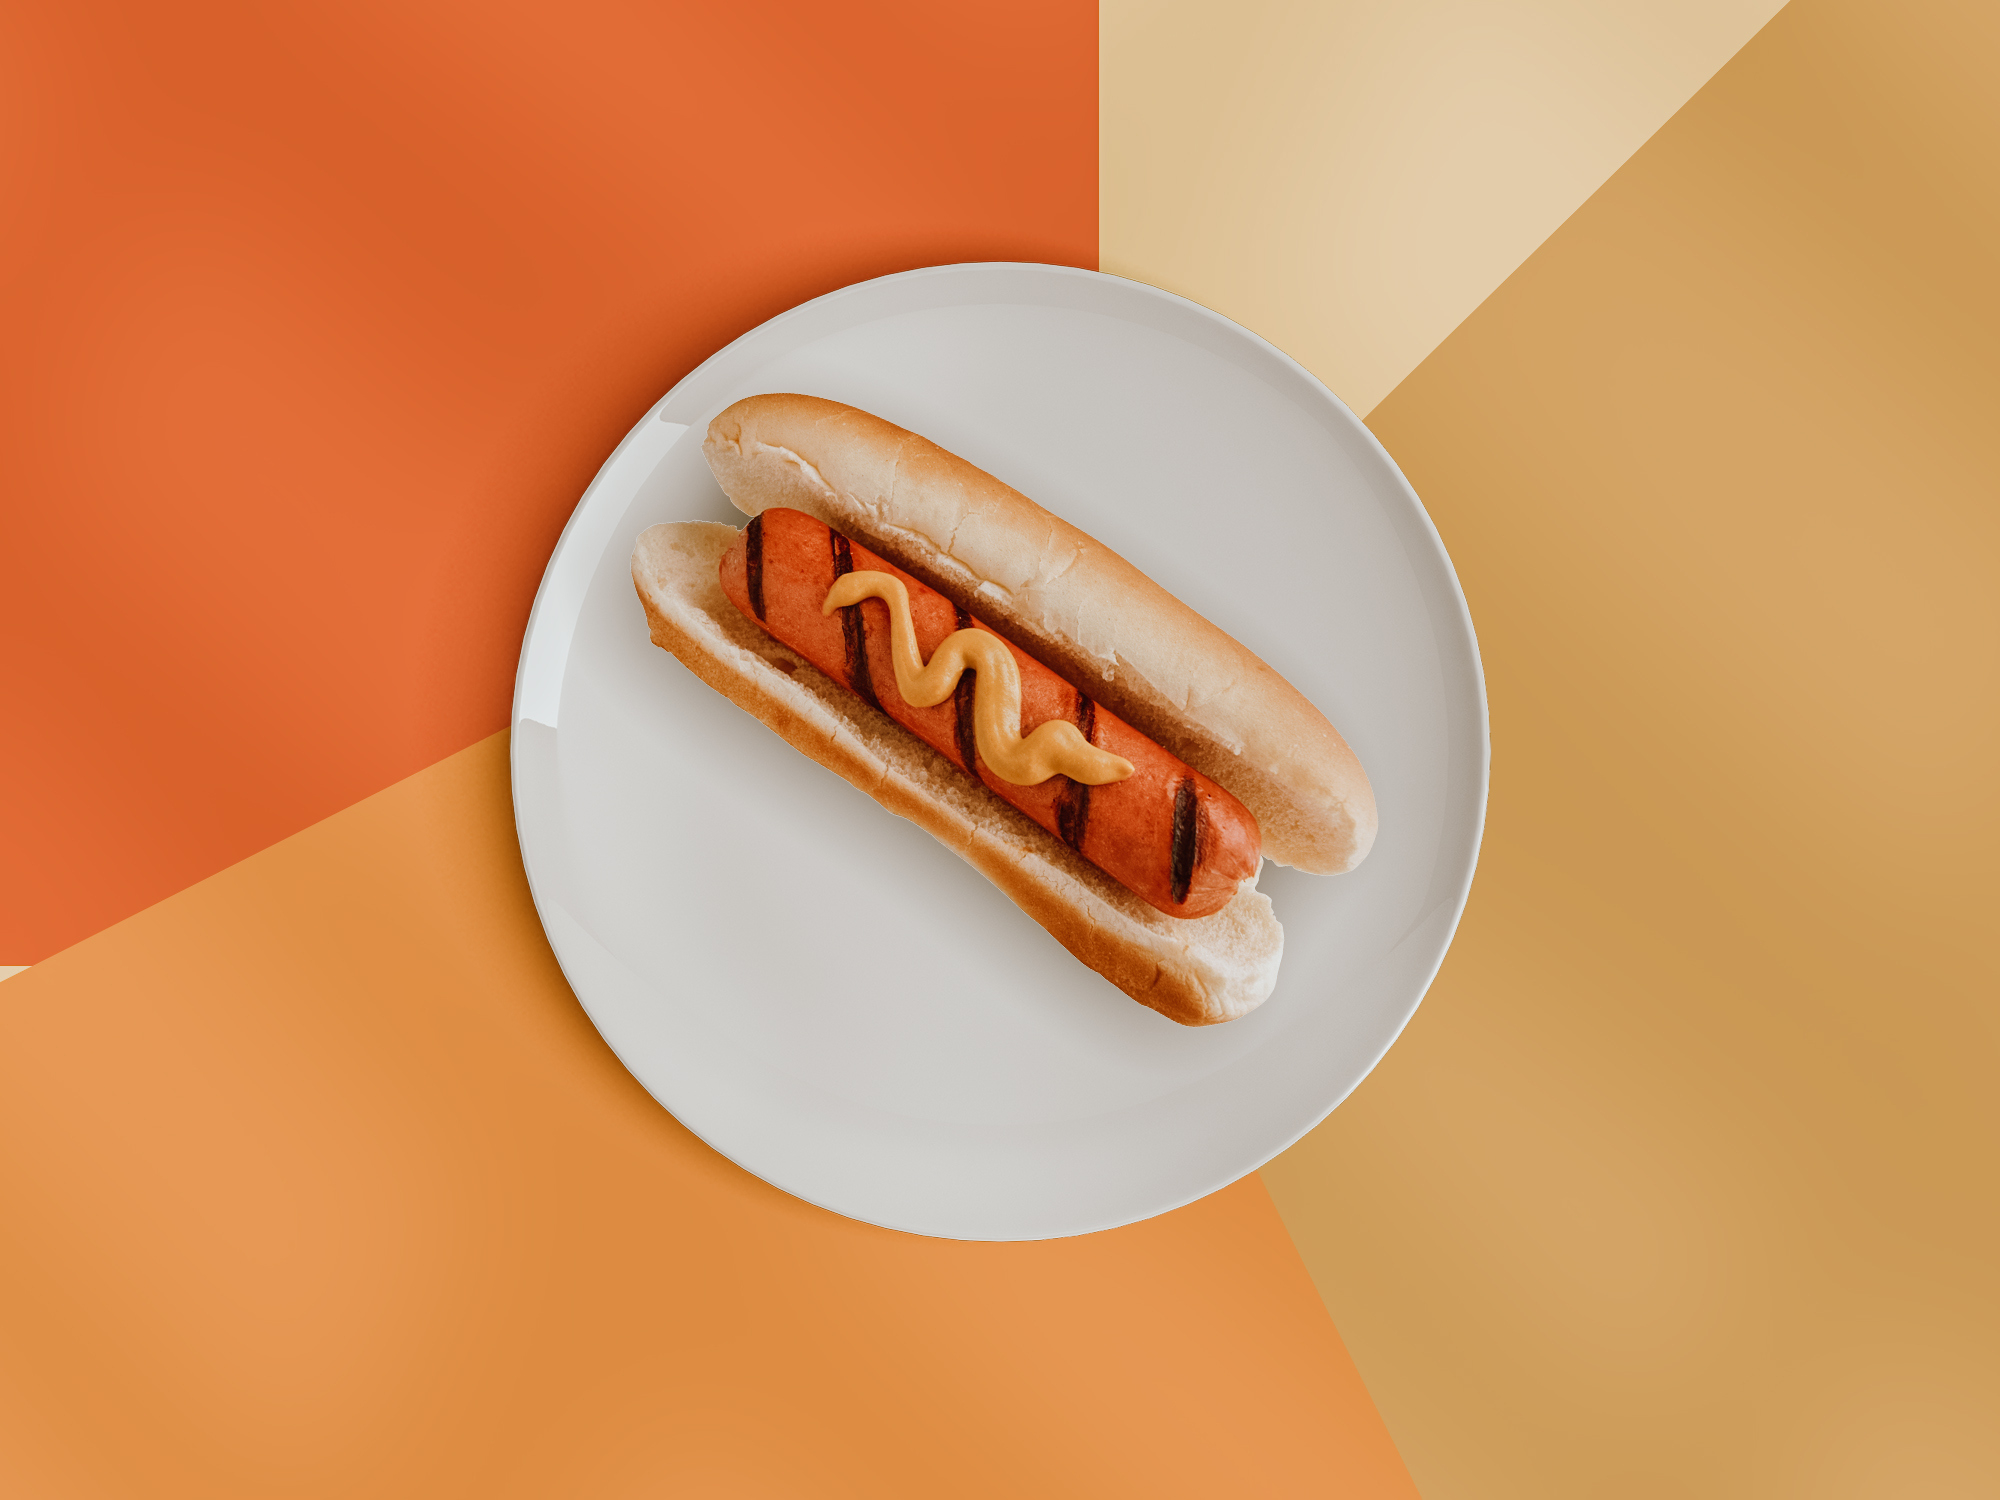 A hot dog in a bun on a plate with mustard coating the top